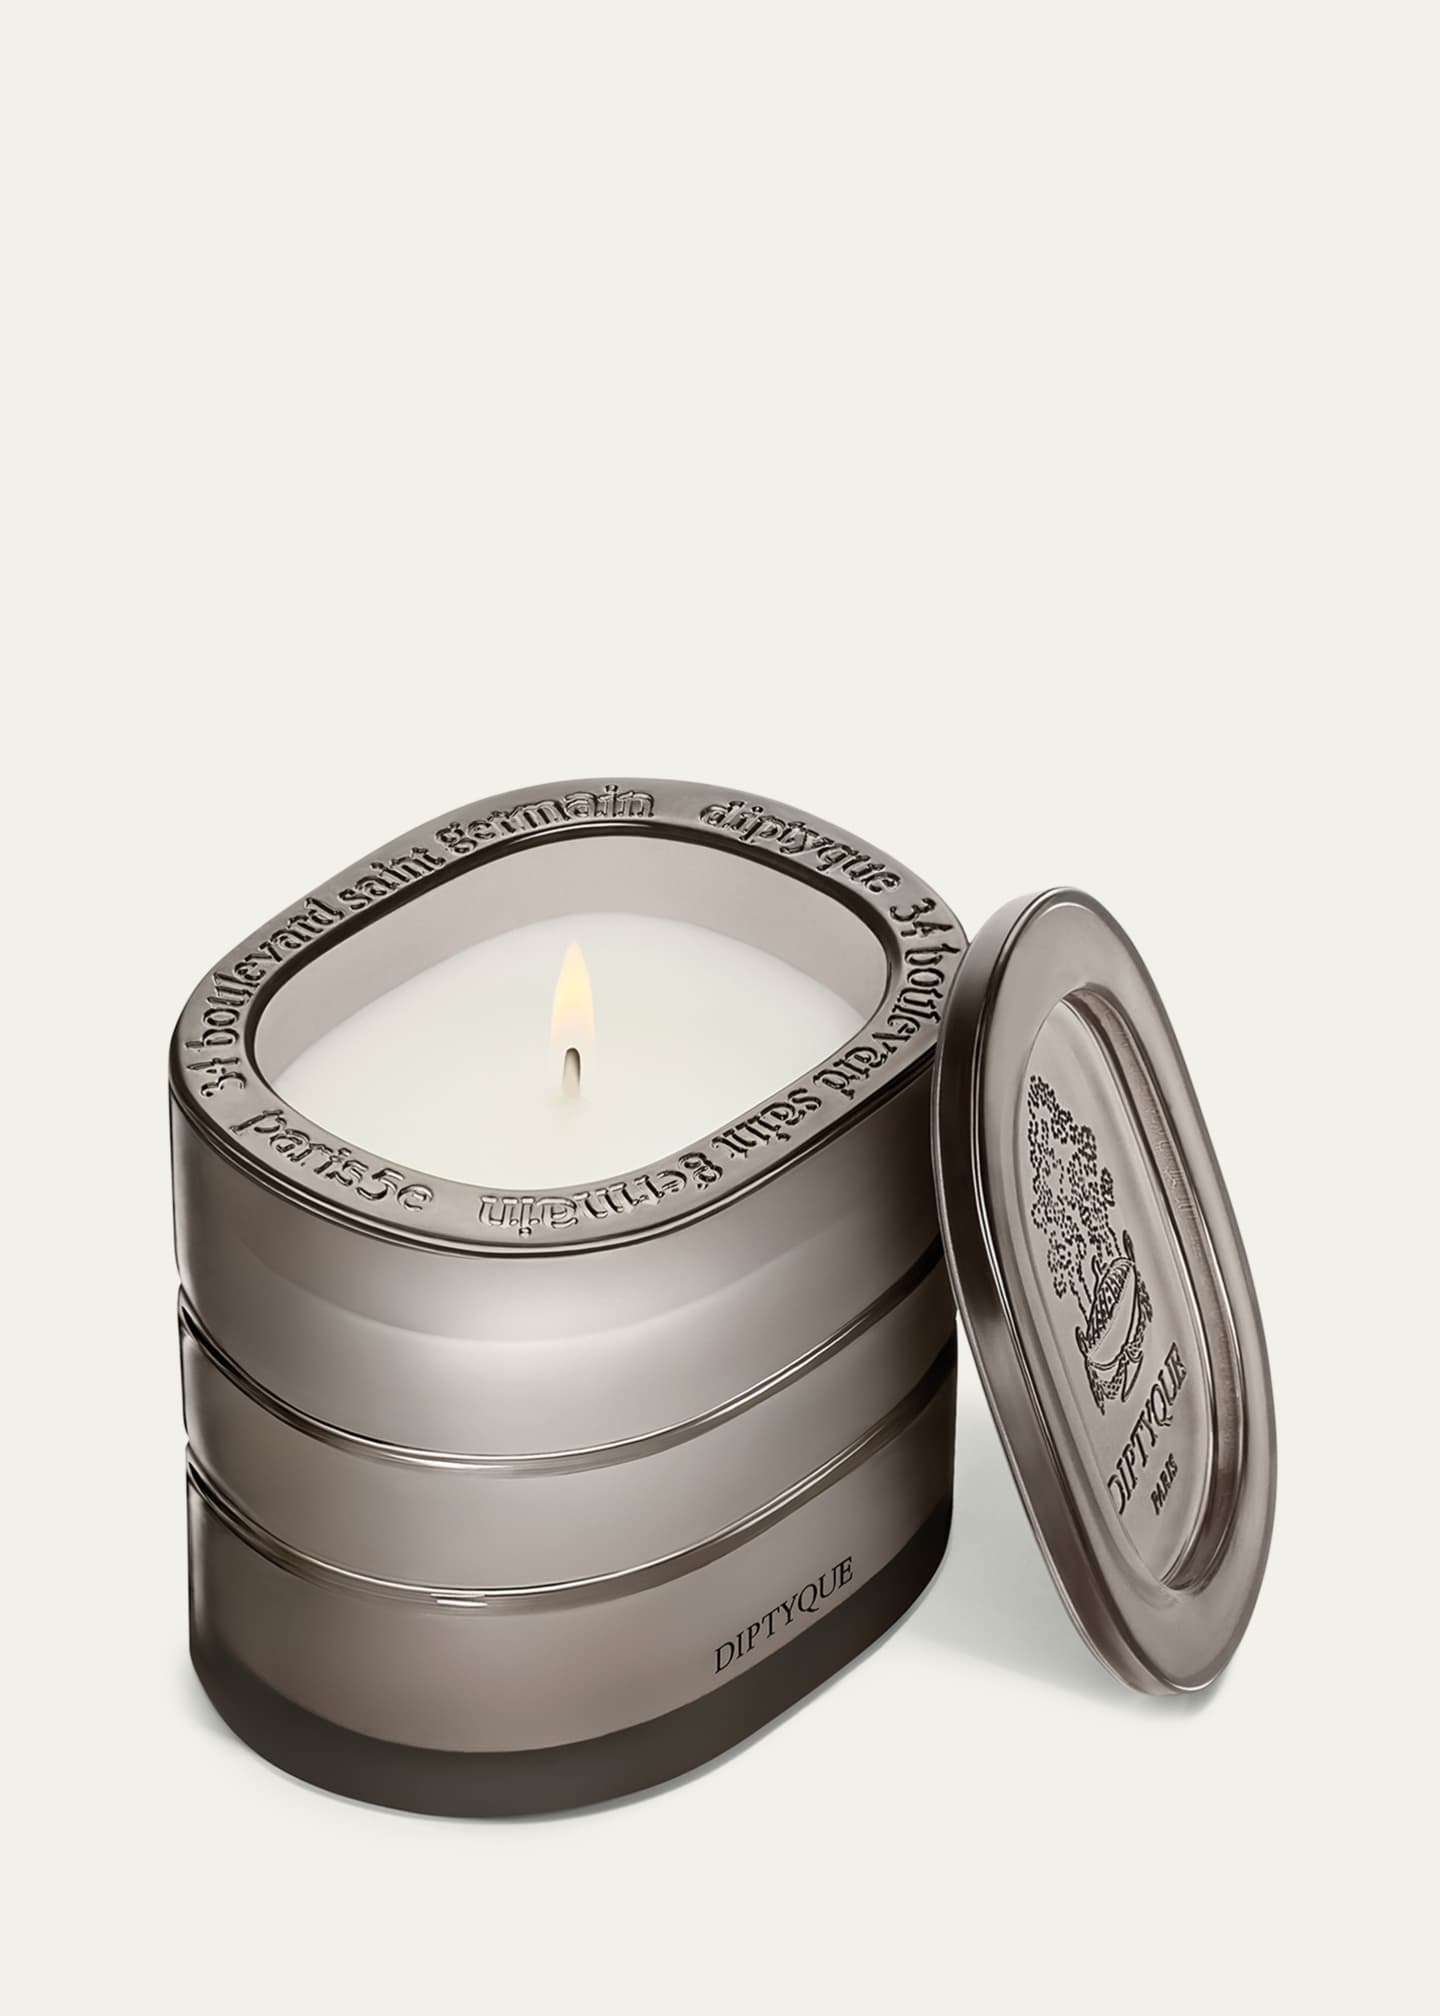 DIPTYQUE La Vallee du Temps (Valley of Time) Refillable Candle, 9.5 oz.